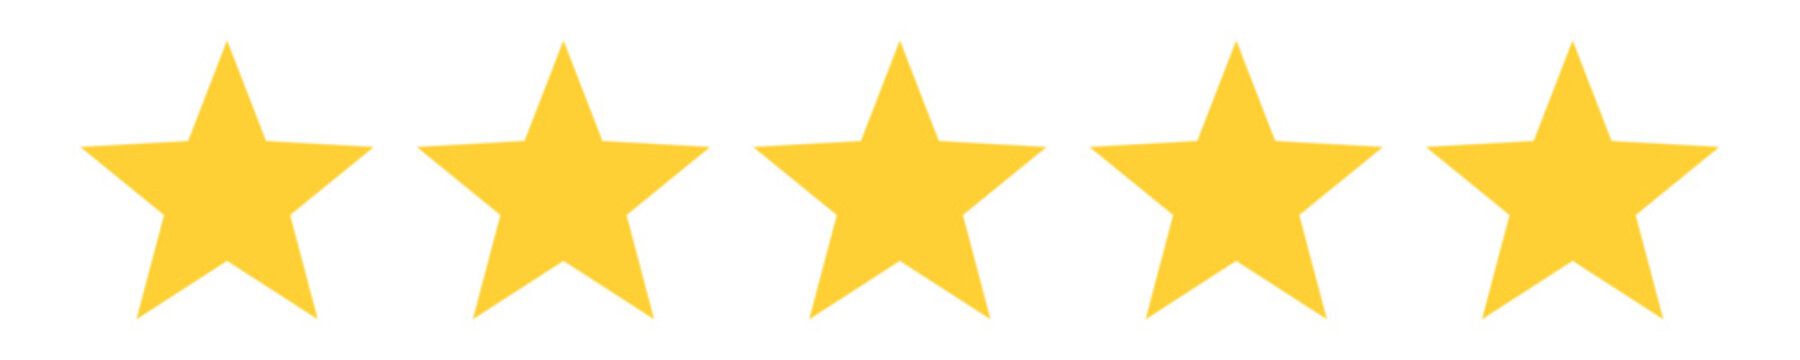 Five stars rating icon isolated on transparent background.  